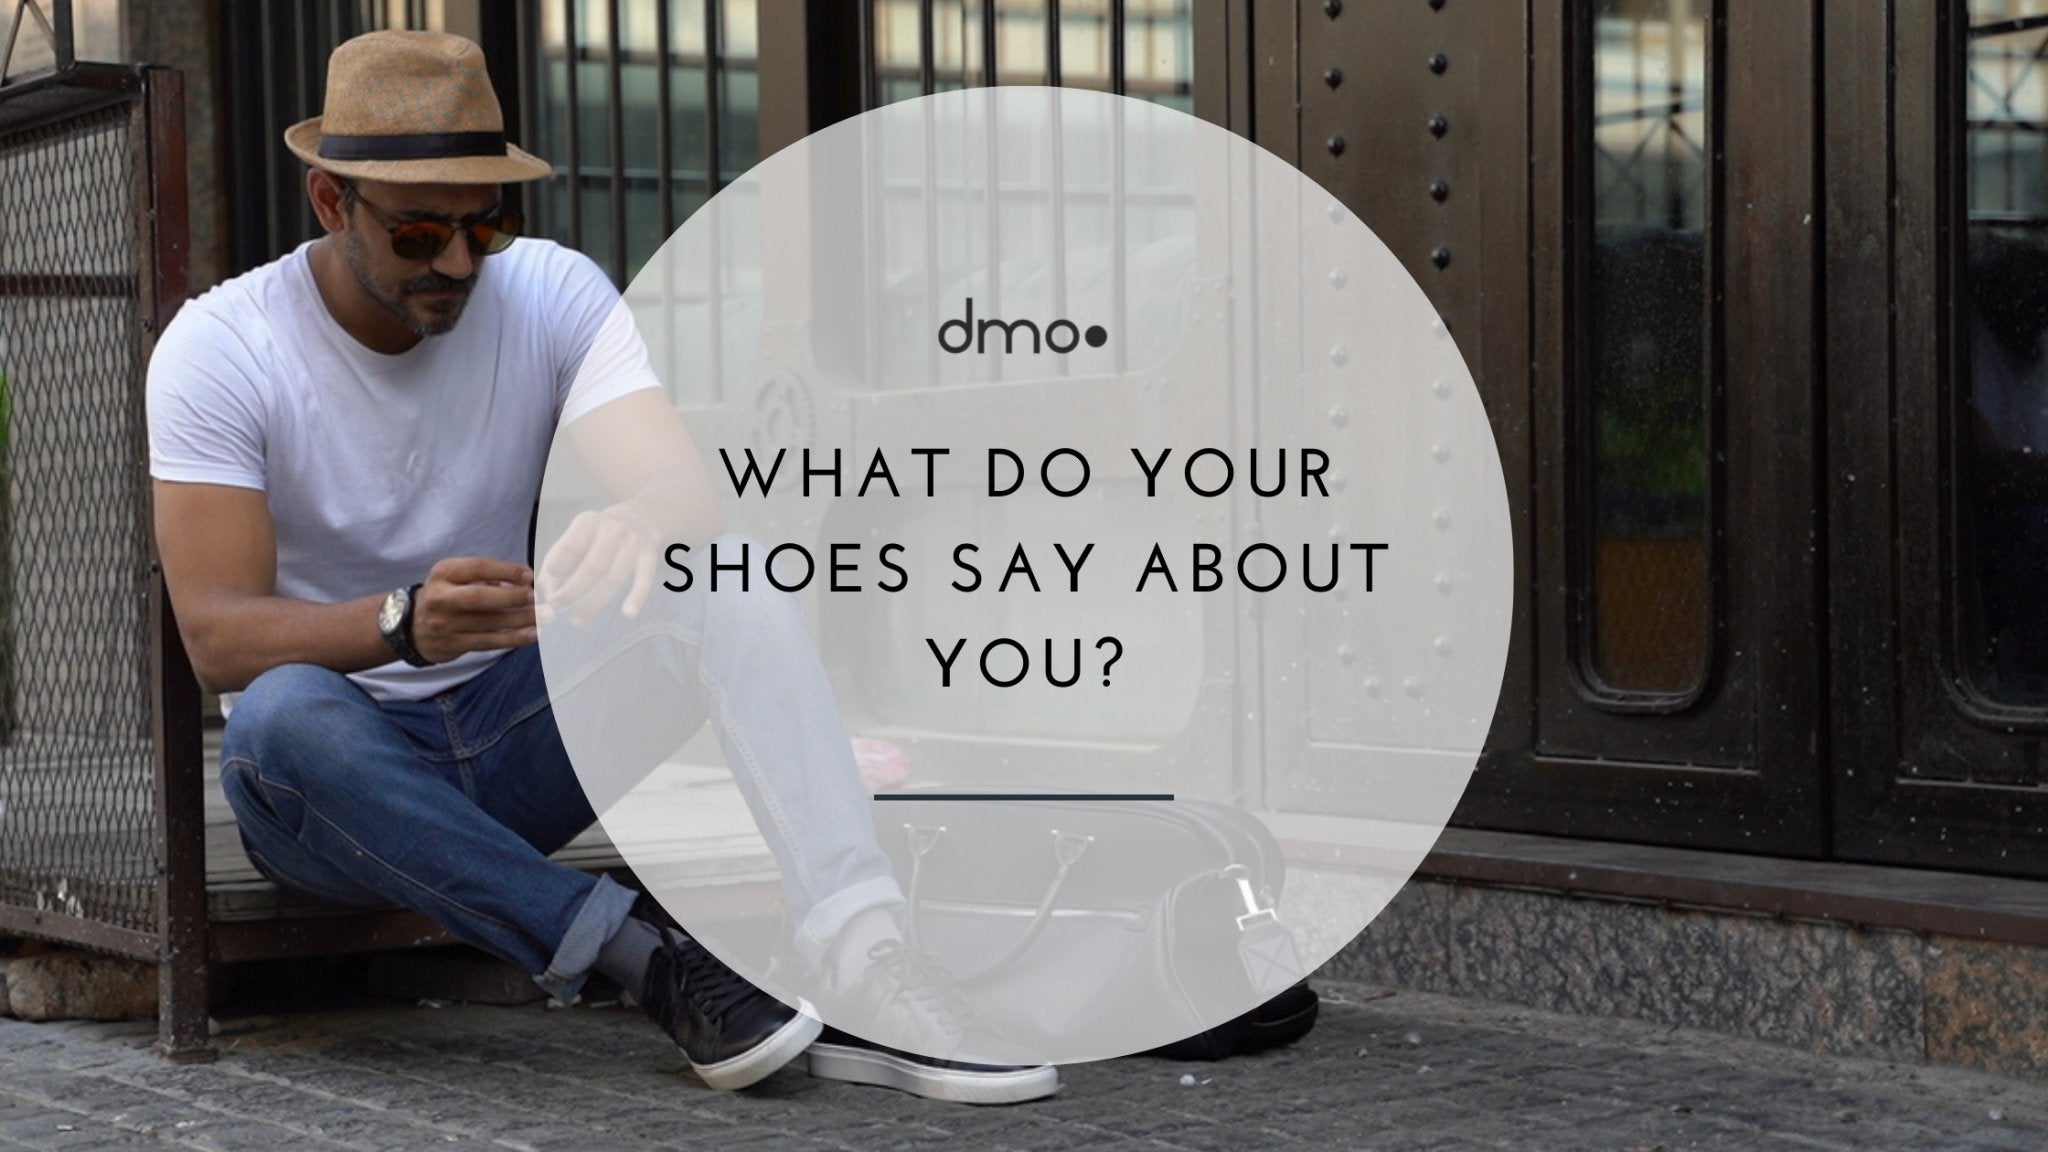 What Do Your Shoes Say About You? - dmodot Shoes